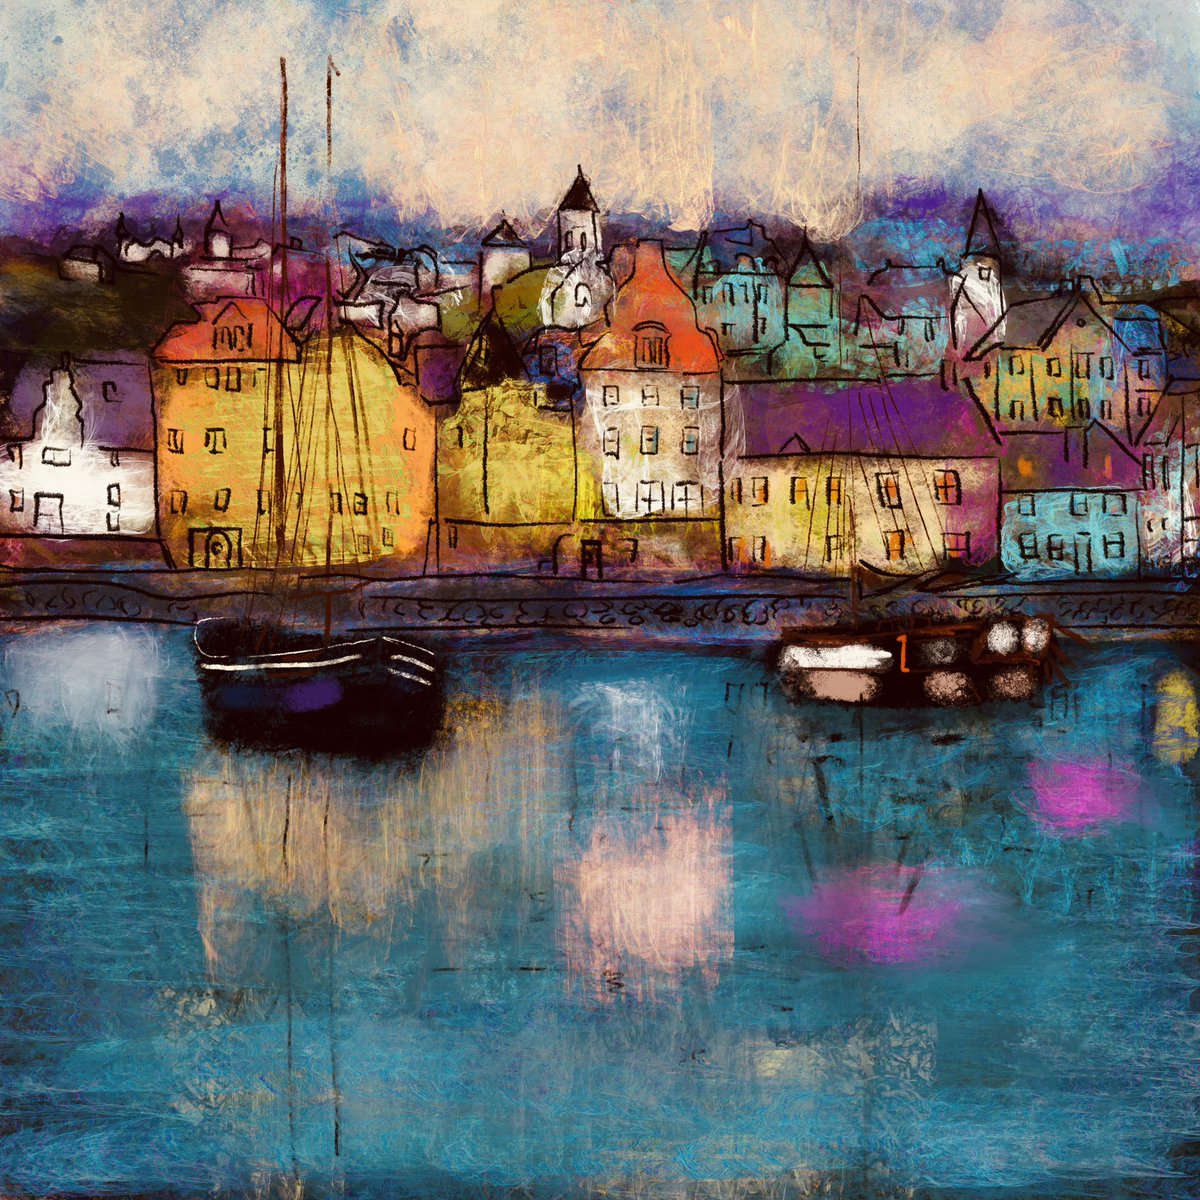 Peaceful harbour at twilight. Wish you all a peaceful weekend. #art